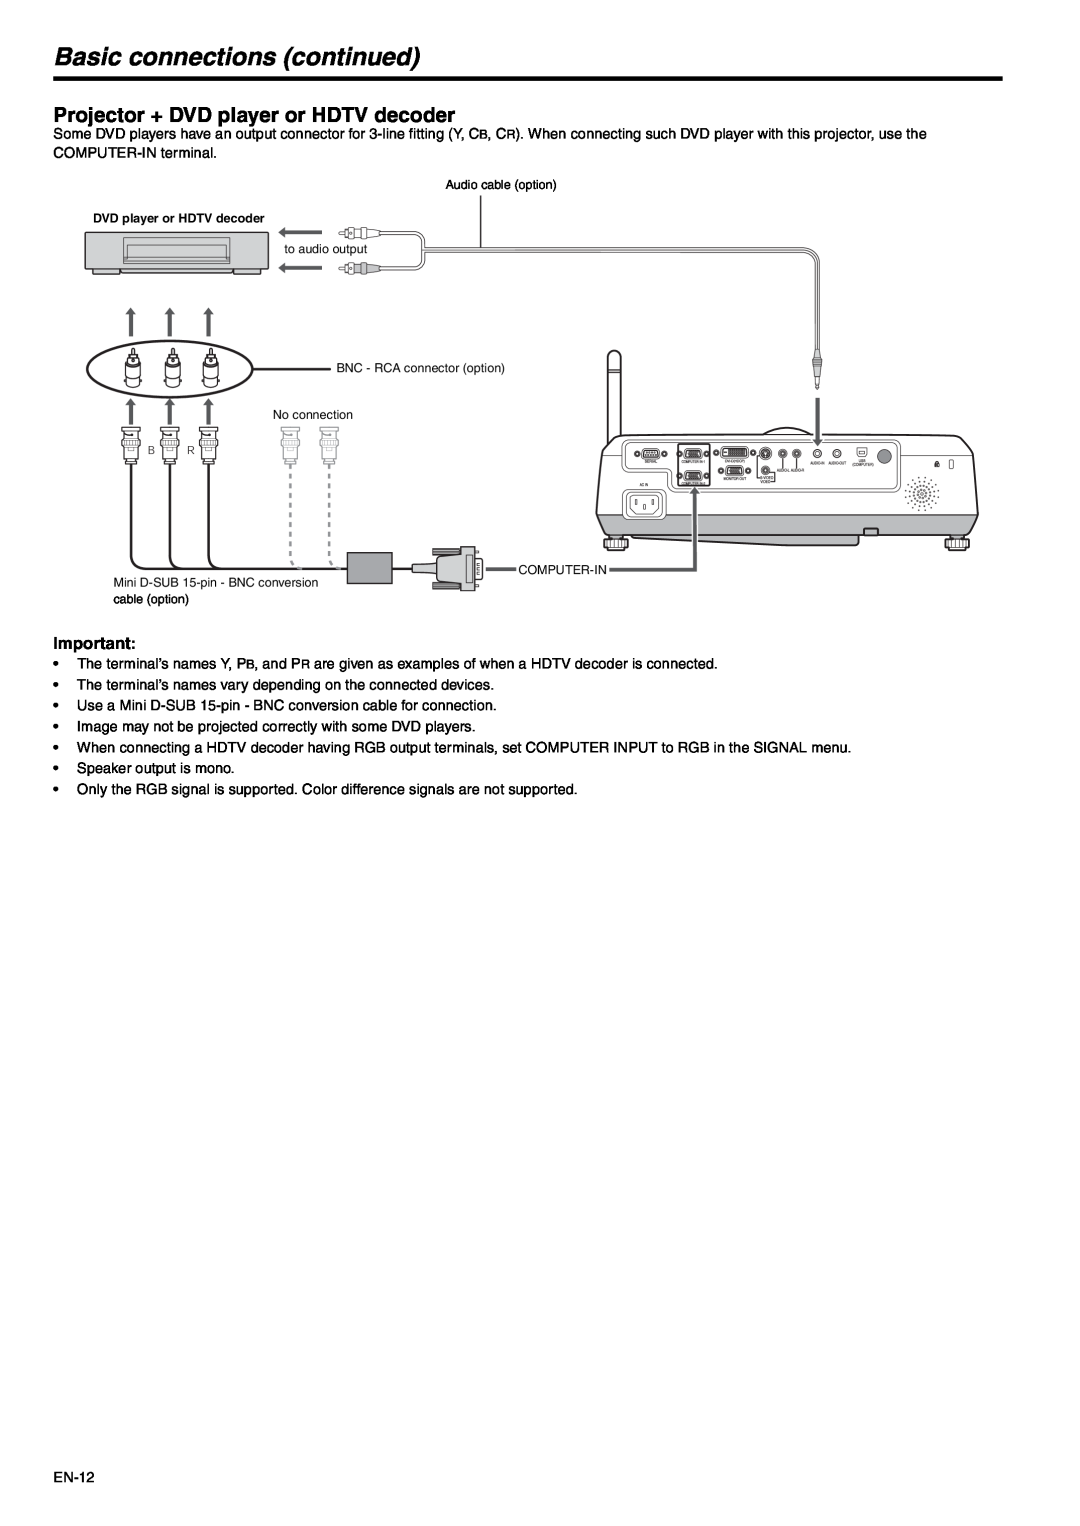 Mitsubishi Electronics EX53U, EX53E user manual Basic connections continued, Projector + DVD player or HDTV decoder 